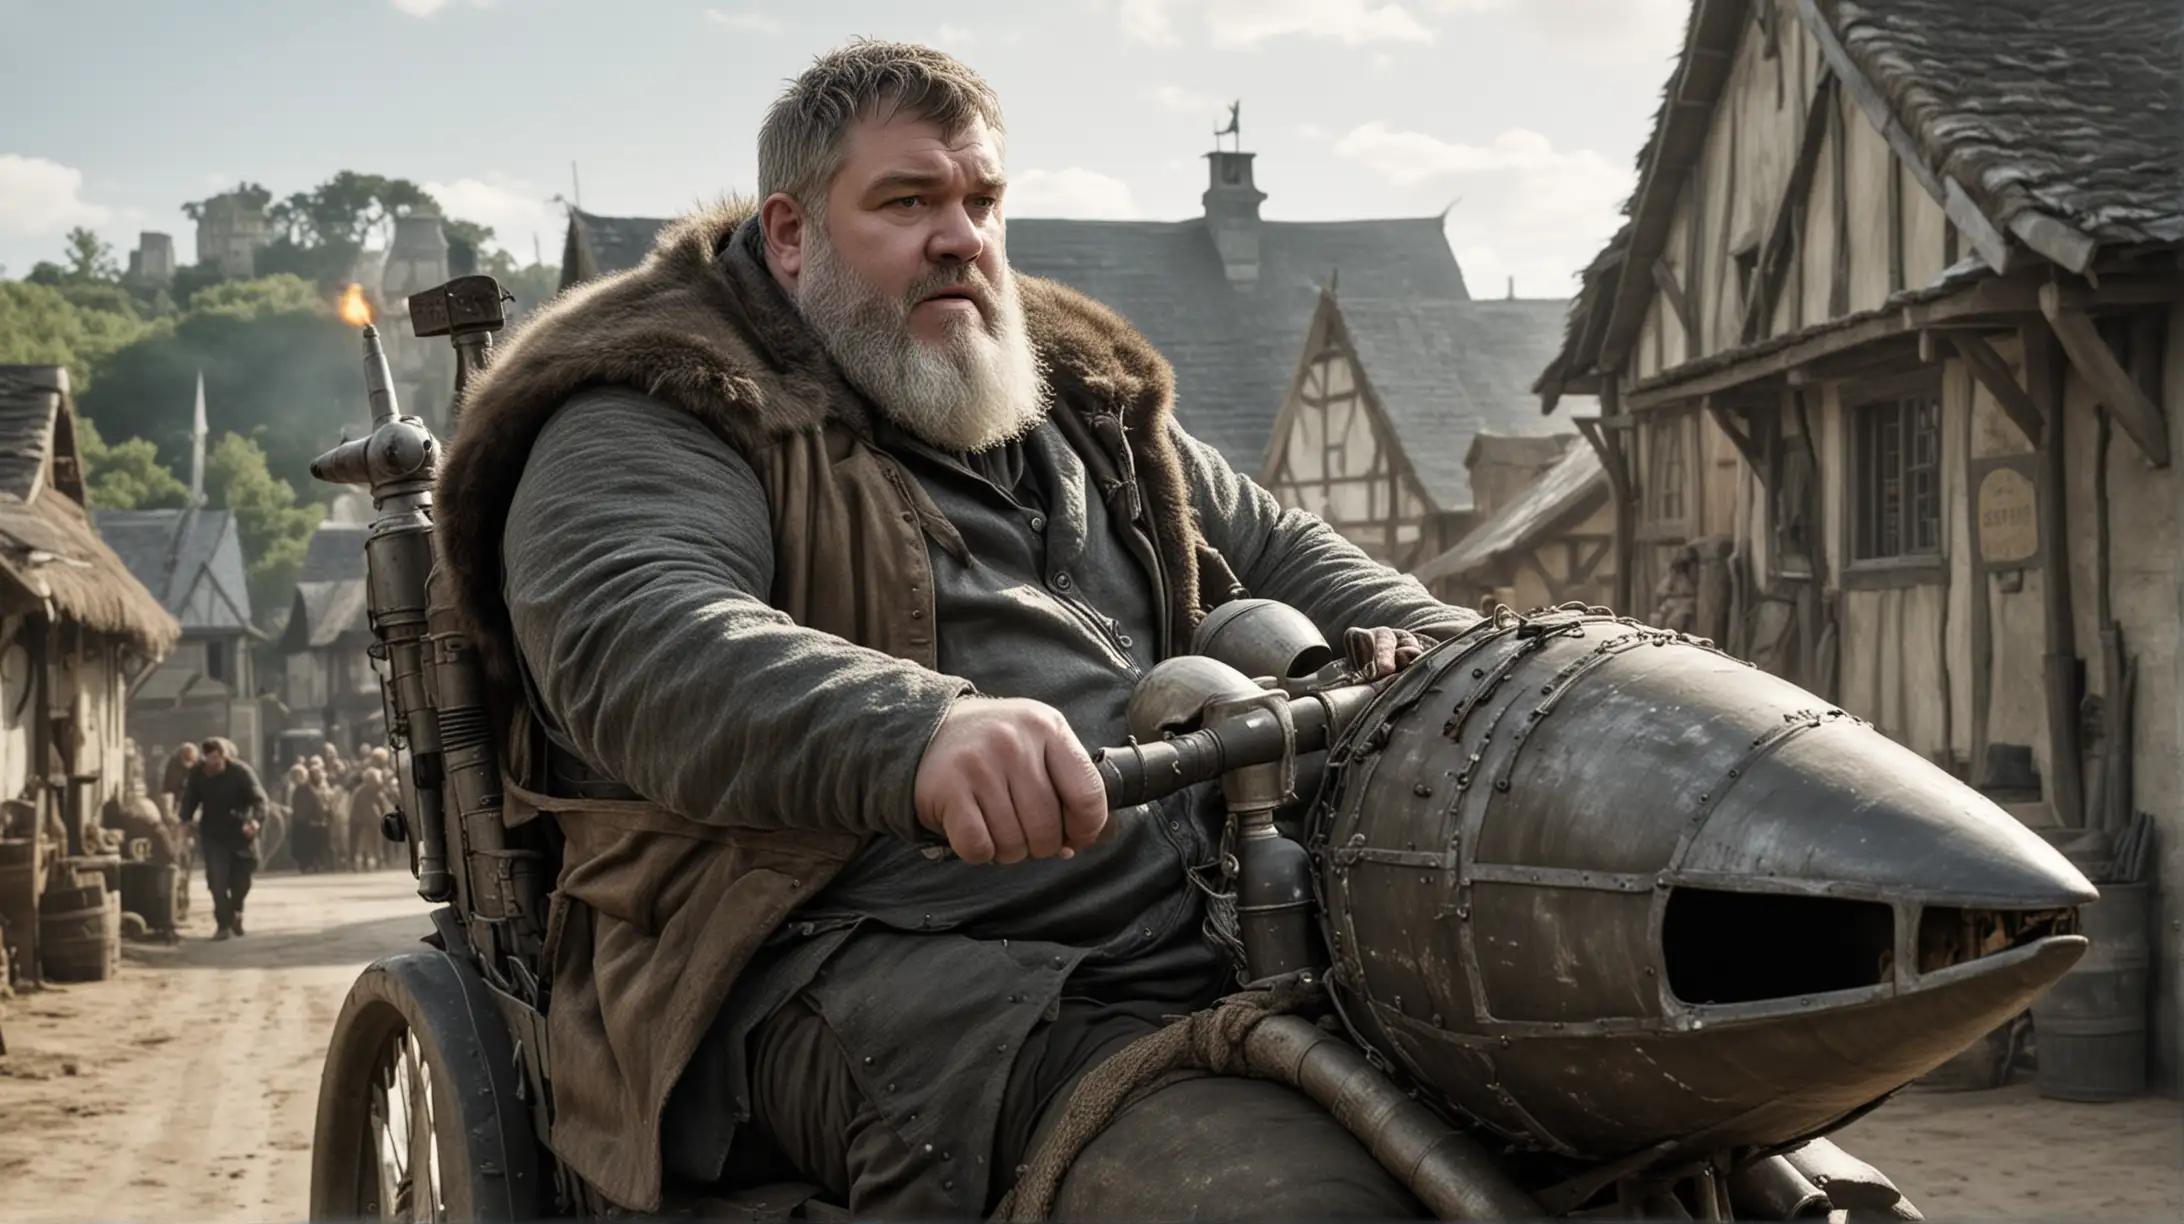 hodor from game of thrones but with dark hair, riding a rocket through a village